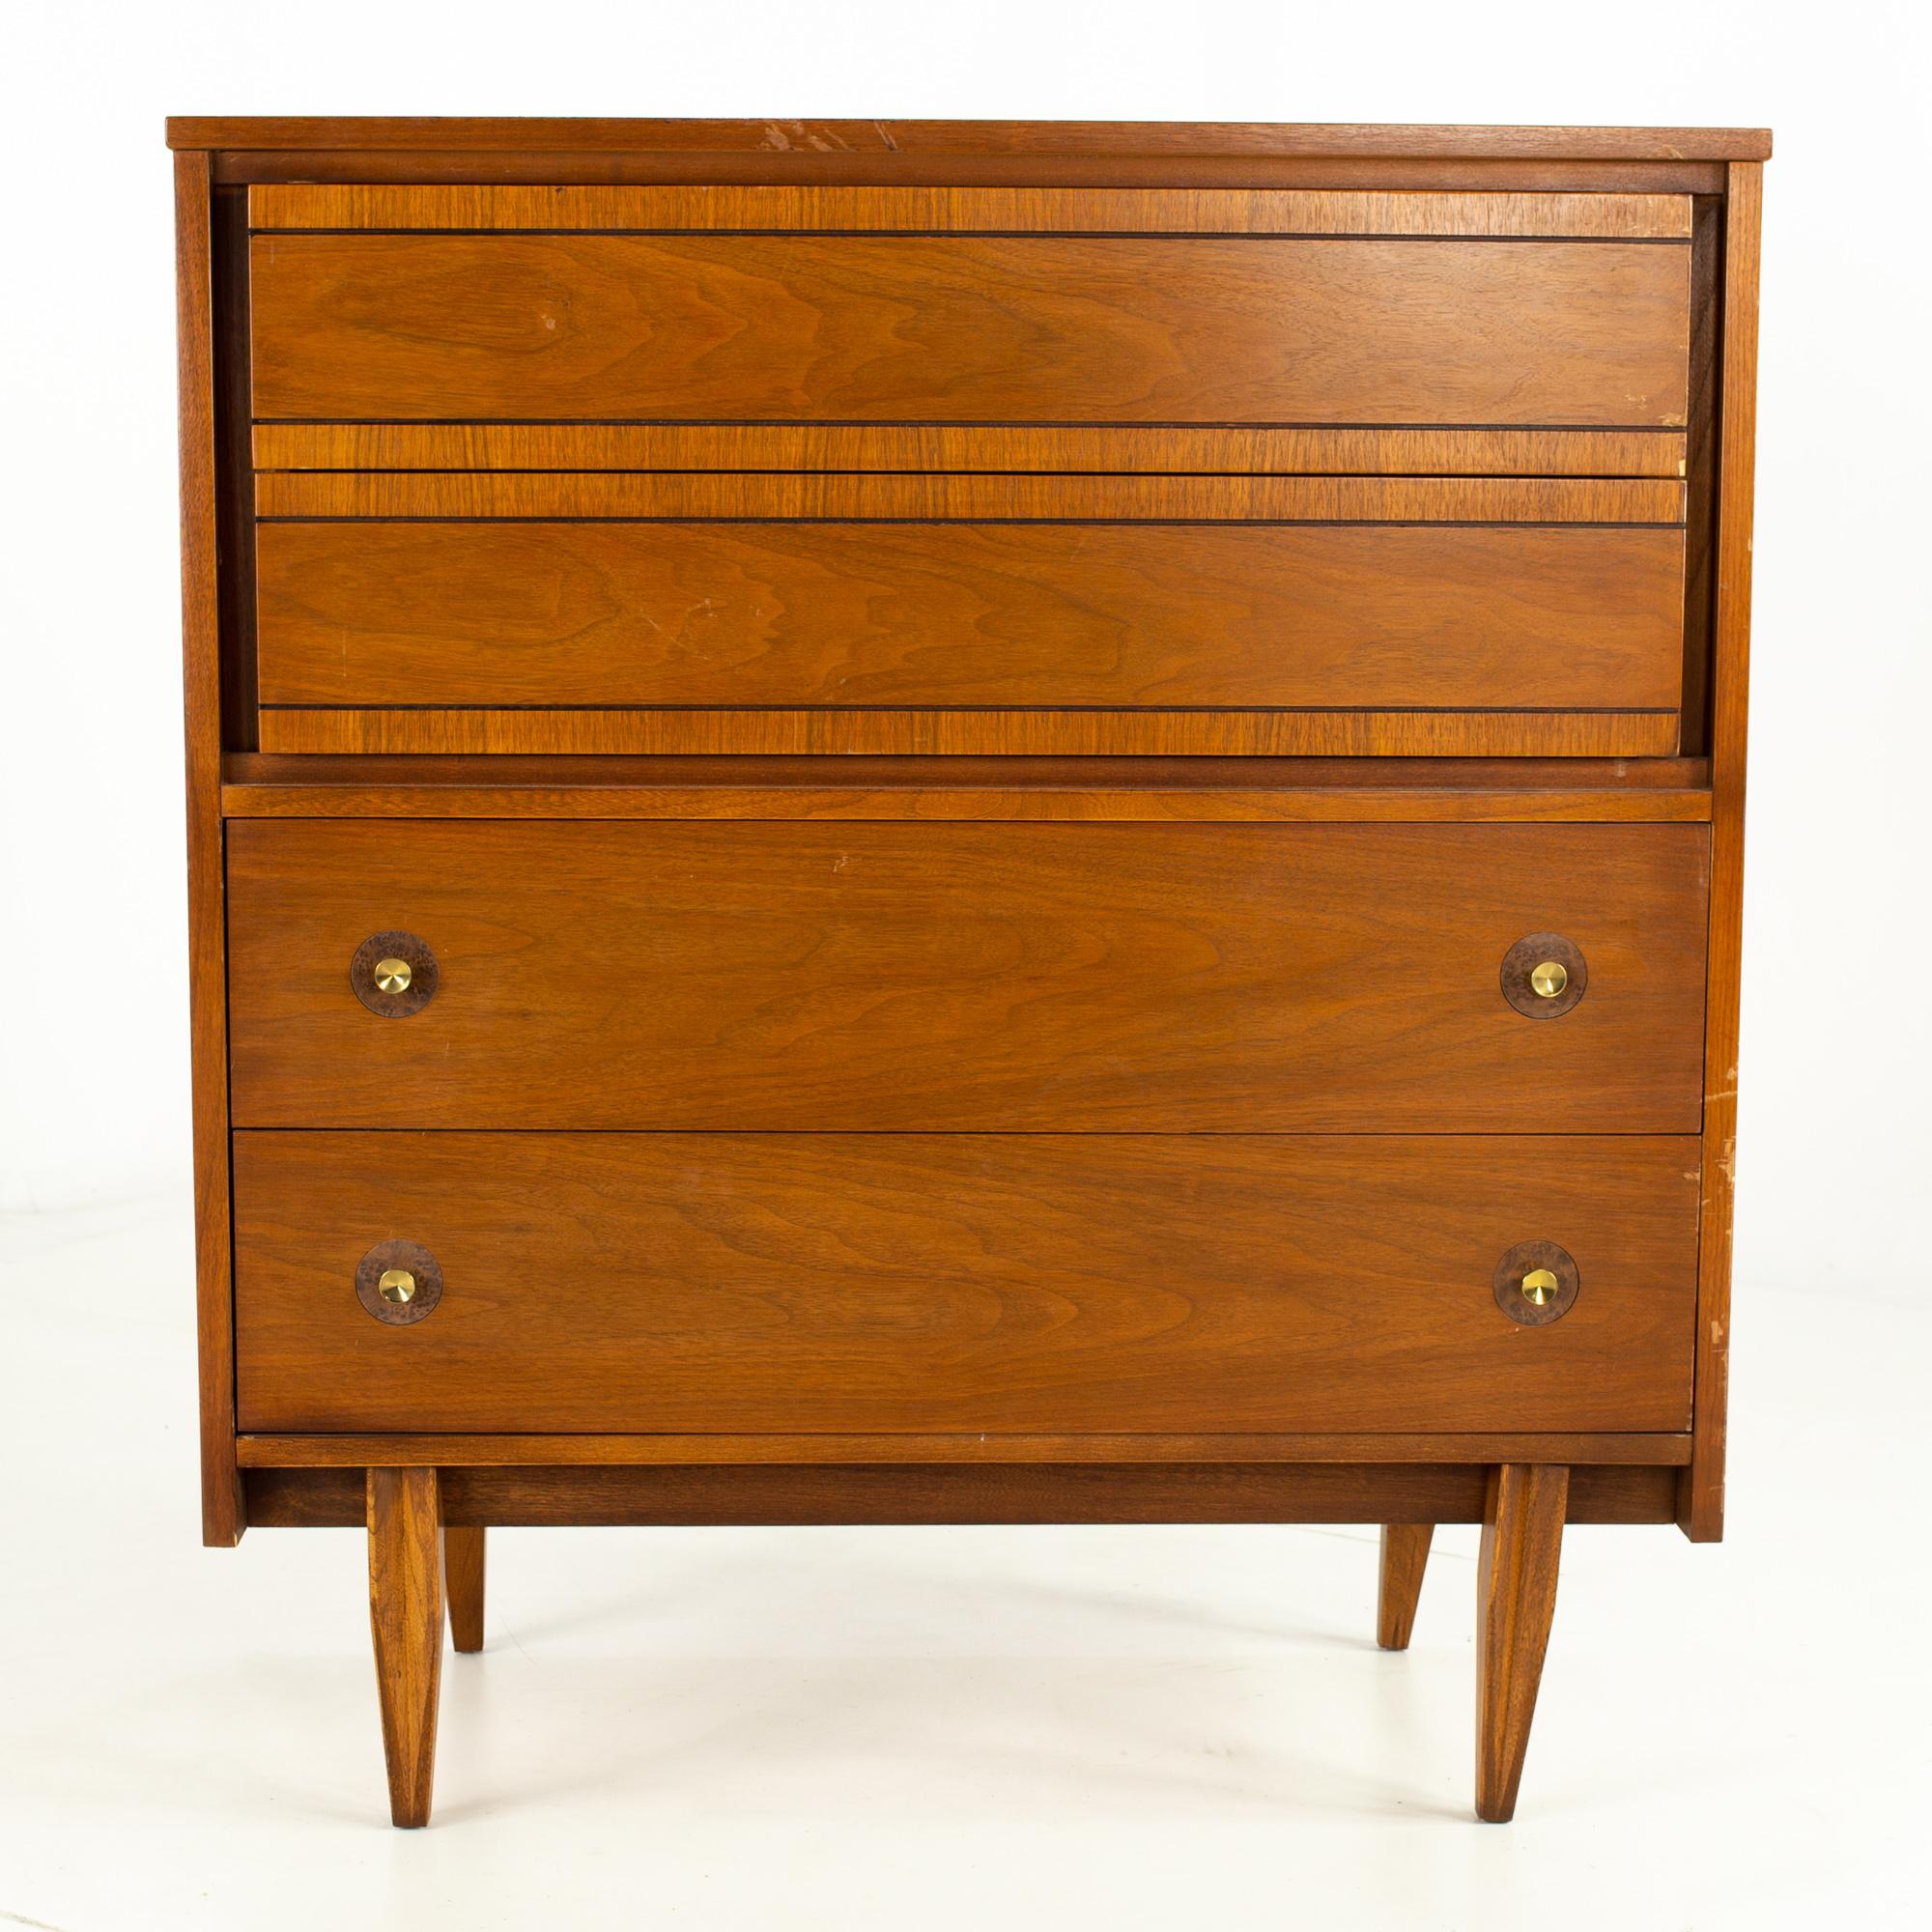 Mainline by Hooker Mid Century walnut and brass 4-drawer highboy dresser
Measures: 38 wide x 18 deep x 44.25 high

This price includes getting this piece in what we call restored vintage condition. That means the piece is permanently fixed upon